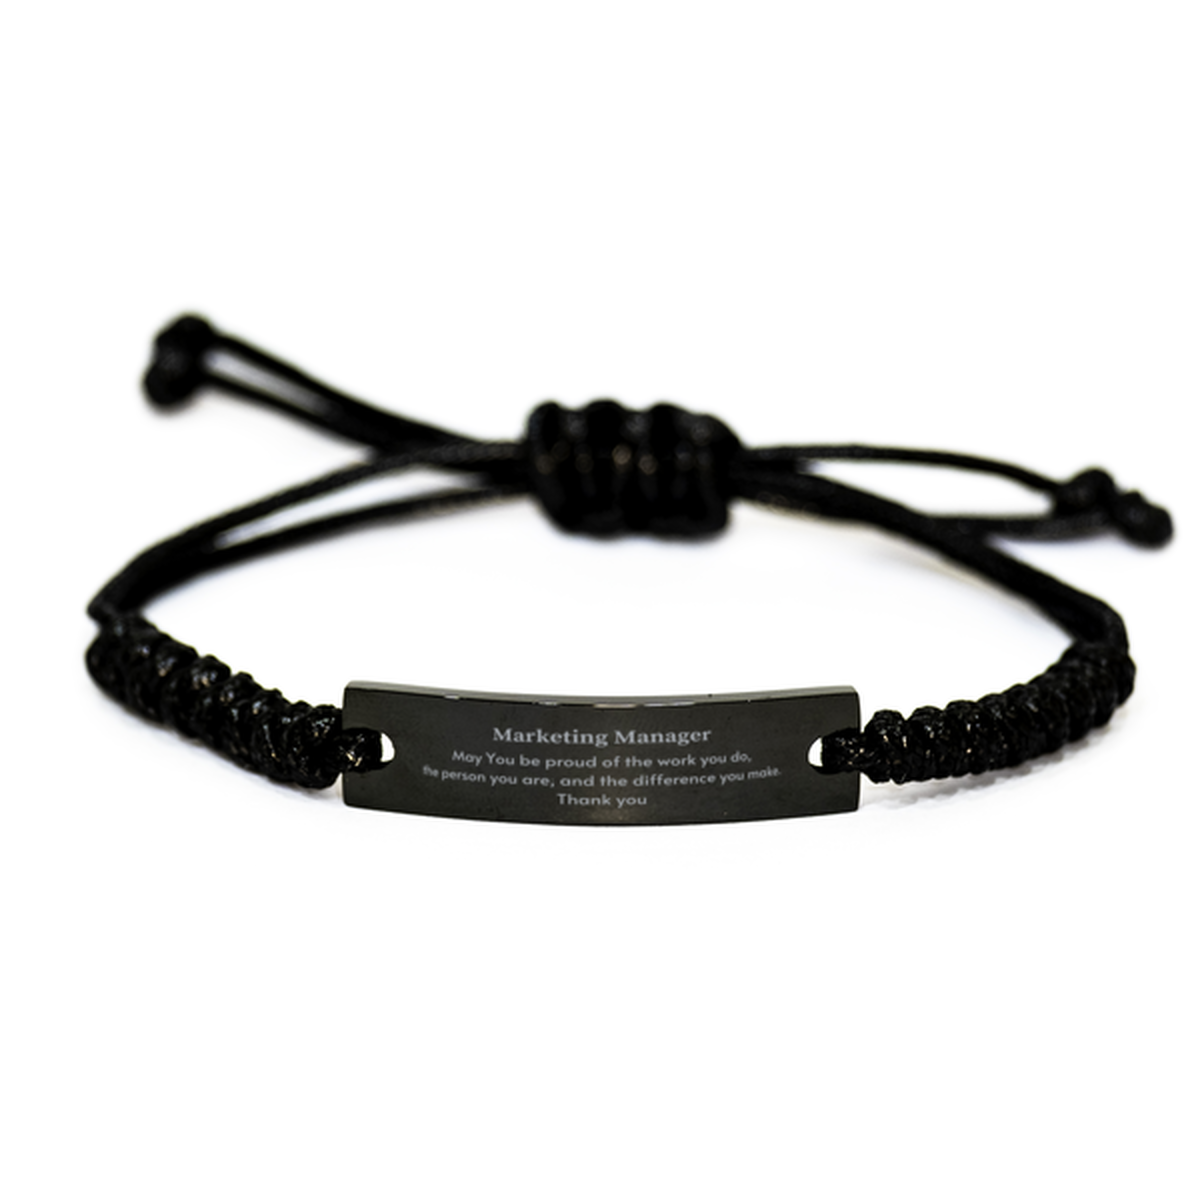 Heartwarming Black Rope Bracelet Retirement Coworkers Gifts for Marketing Manager, Marketing Manager May You be proud of the work you do, the person you are Gifts for Boss Men Women Friends